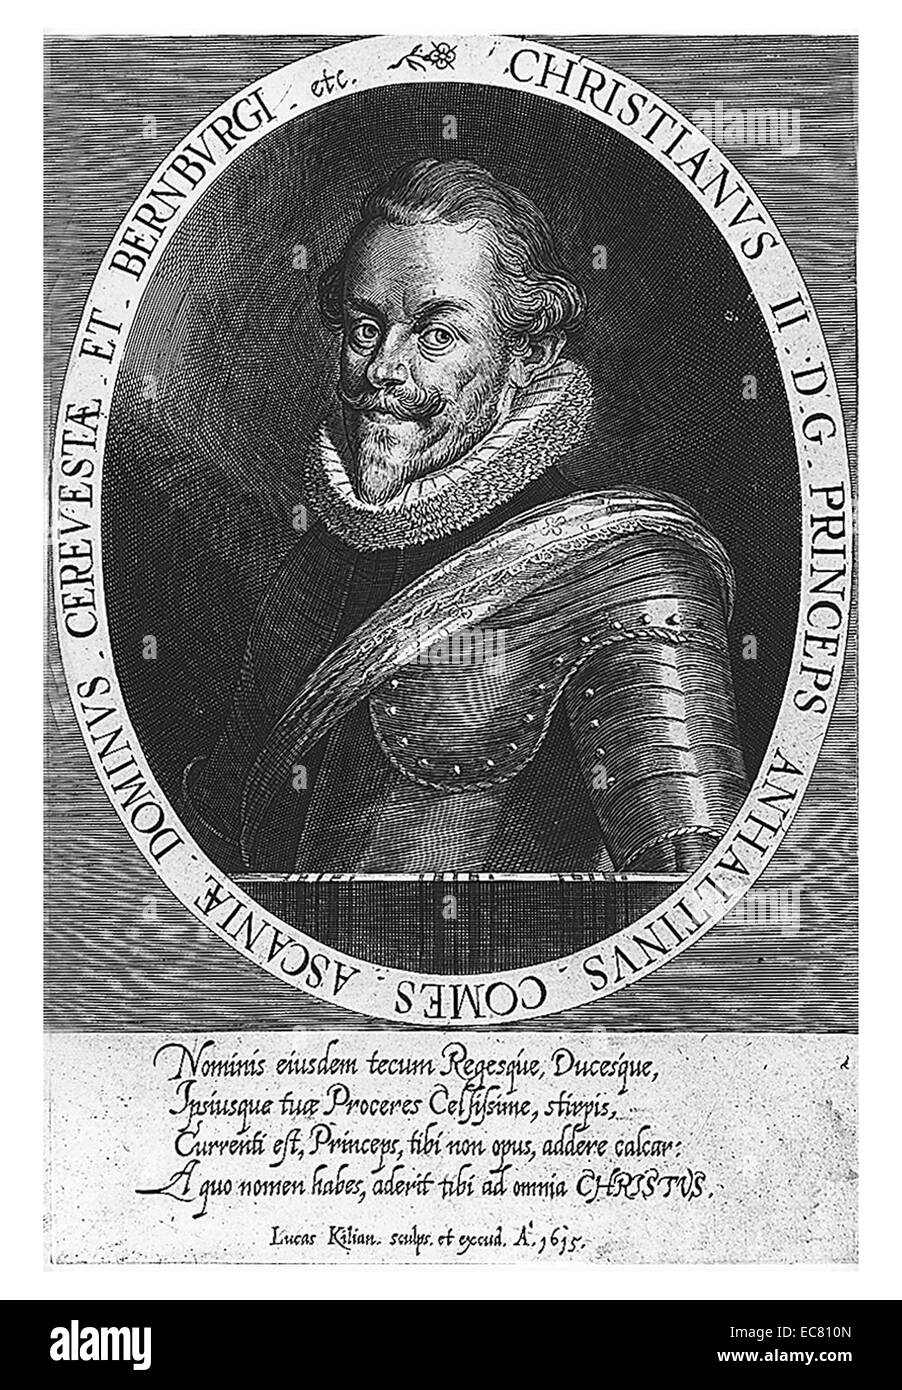 Christian I, Prince of Anhalt-Bernburg (1568 –1630) was a German prince of the House of Ascania. He was ruling prince of Anhalt and, from 1603, ruling prince of the revived principality of Anhalt-Bernburg. From 1595 he was governor of Upper Palatinate, and soon became the advisor-in-chief of Frederick IV, Elector Palatine. Stock Photo